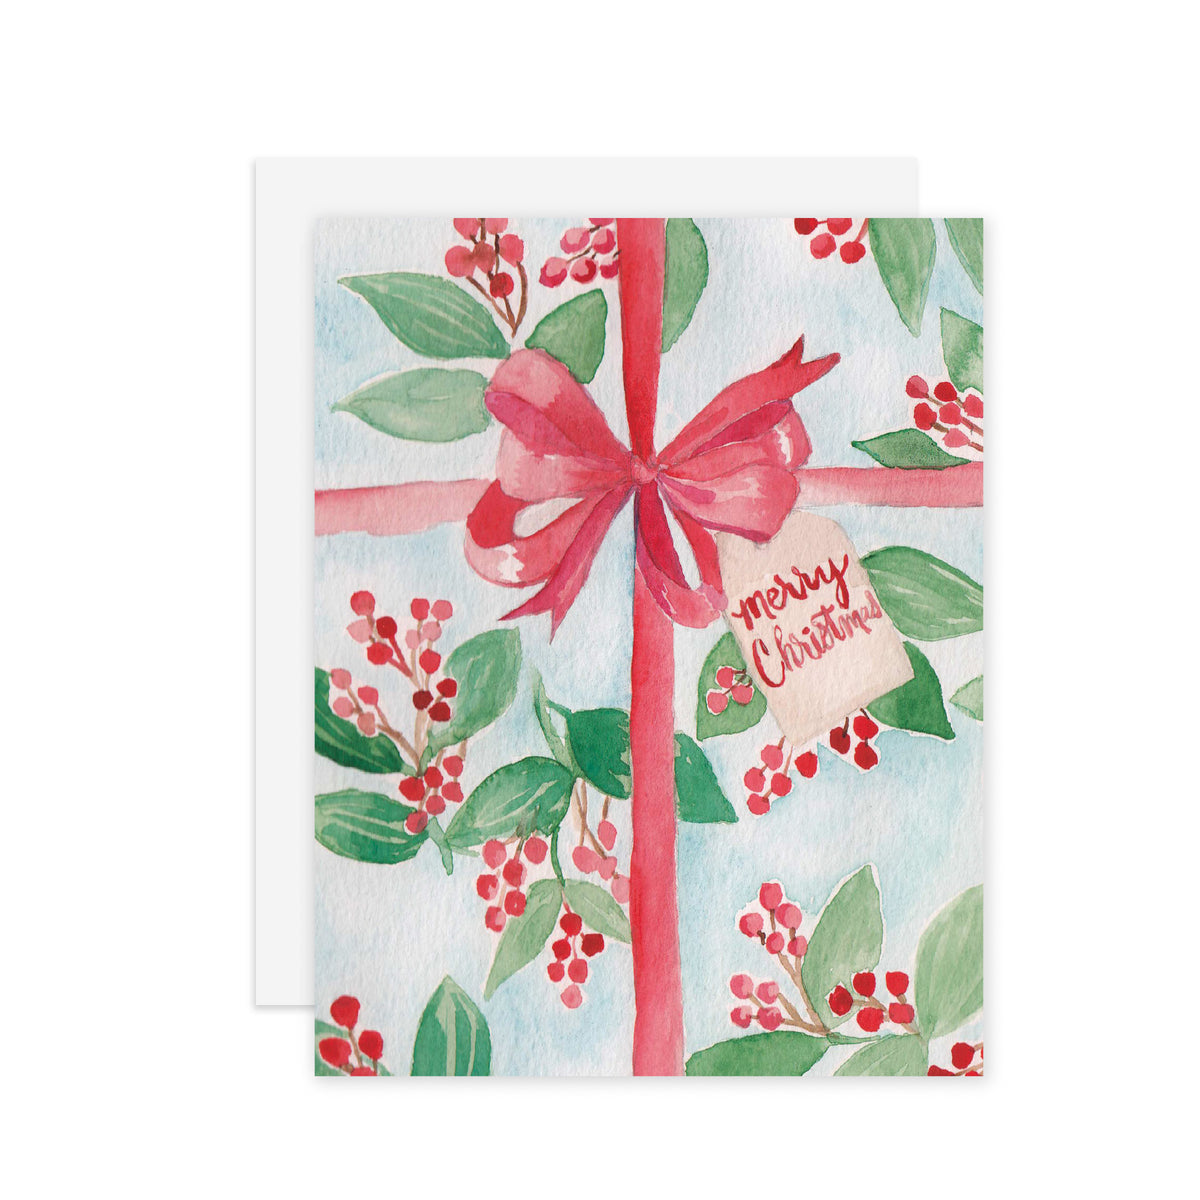 Winterberry Gift- A2 notecard